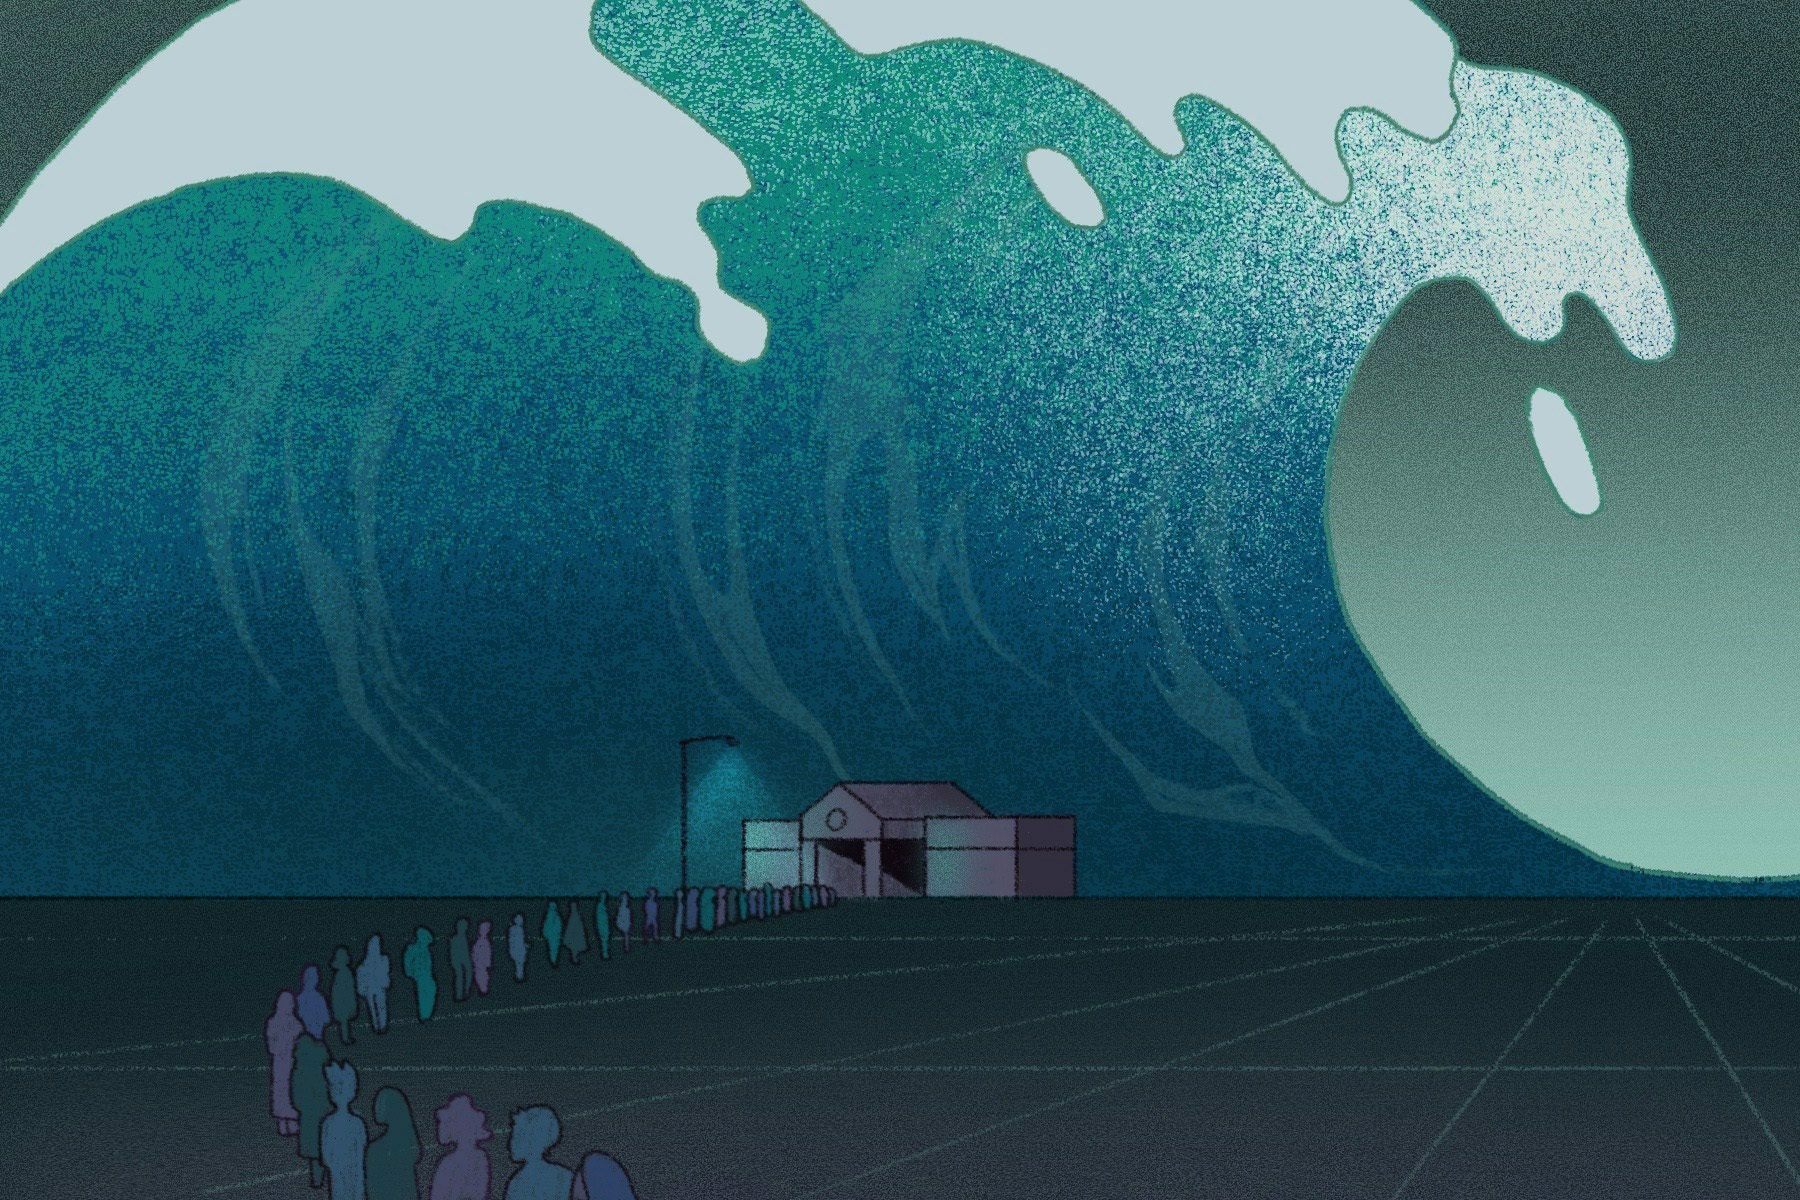 In this illustration, people wait in a very long line to enter an abortion clinic in the distance. In the background, a massive wave is seen about to crash onto the clinic.